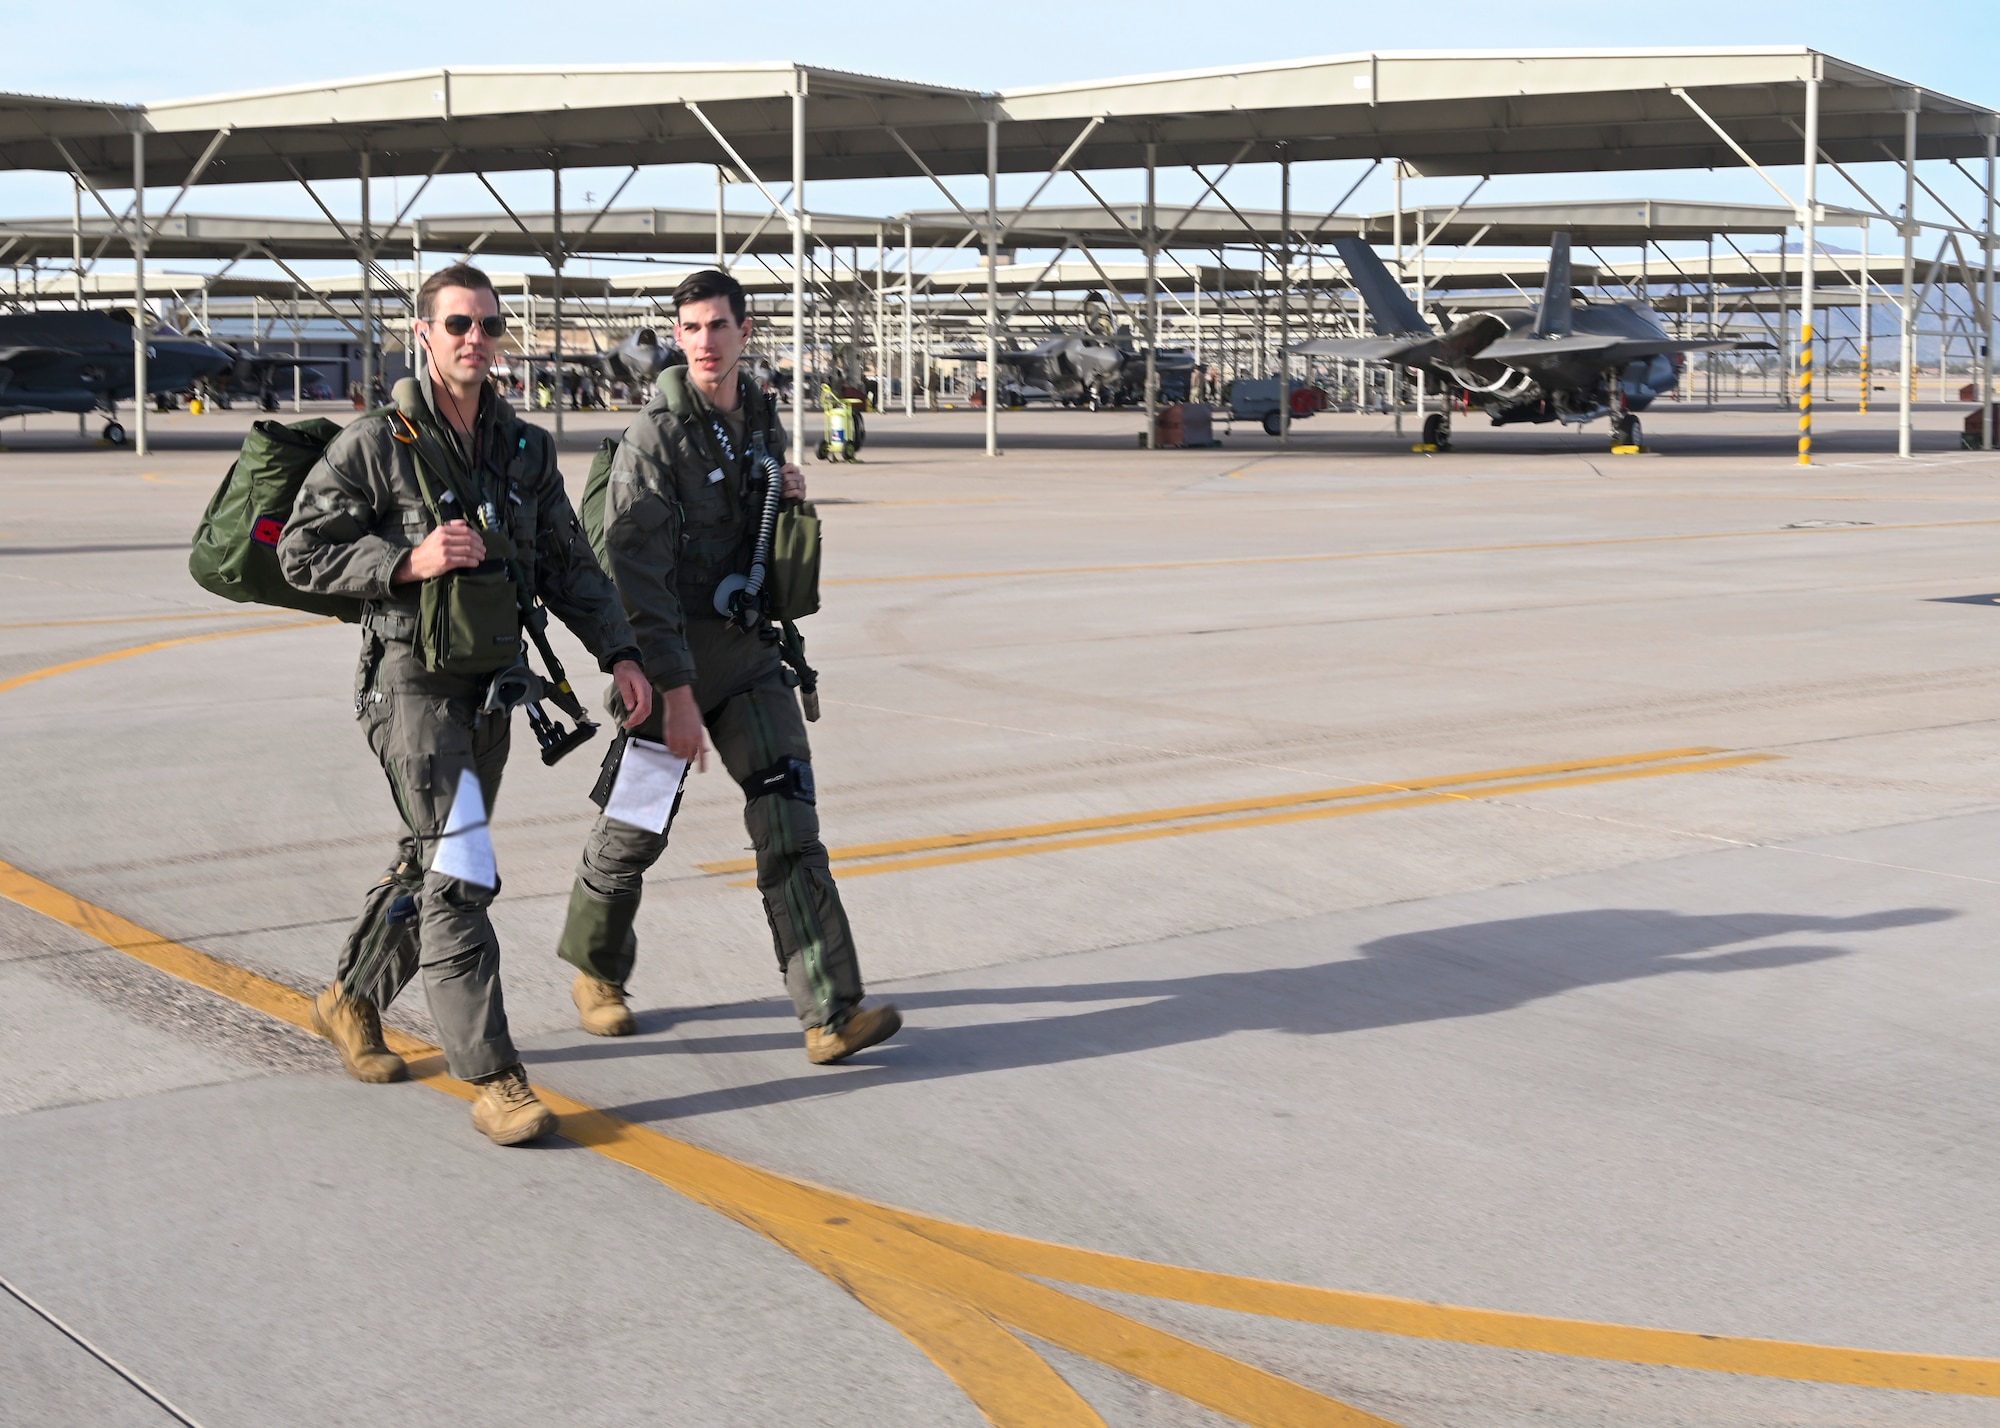 U.S. Air Force Capt. Sean “Echo” Gossner, 63rd Fighter Squadron F-35A Lightning II instructor pilot (left), and his brother 1st Lt. Nicholas “Trek” Gossner, 308th FS F-35A student pilot (right), step out to the flight line Jan. 12, 2022, at Luke Air Force Base, Ariz.